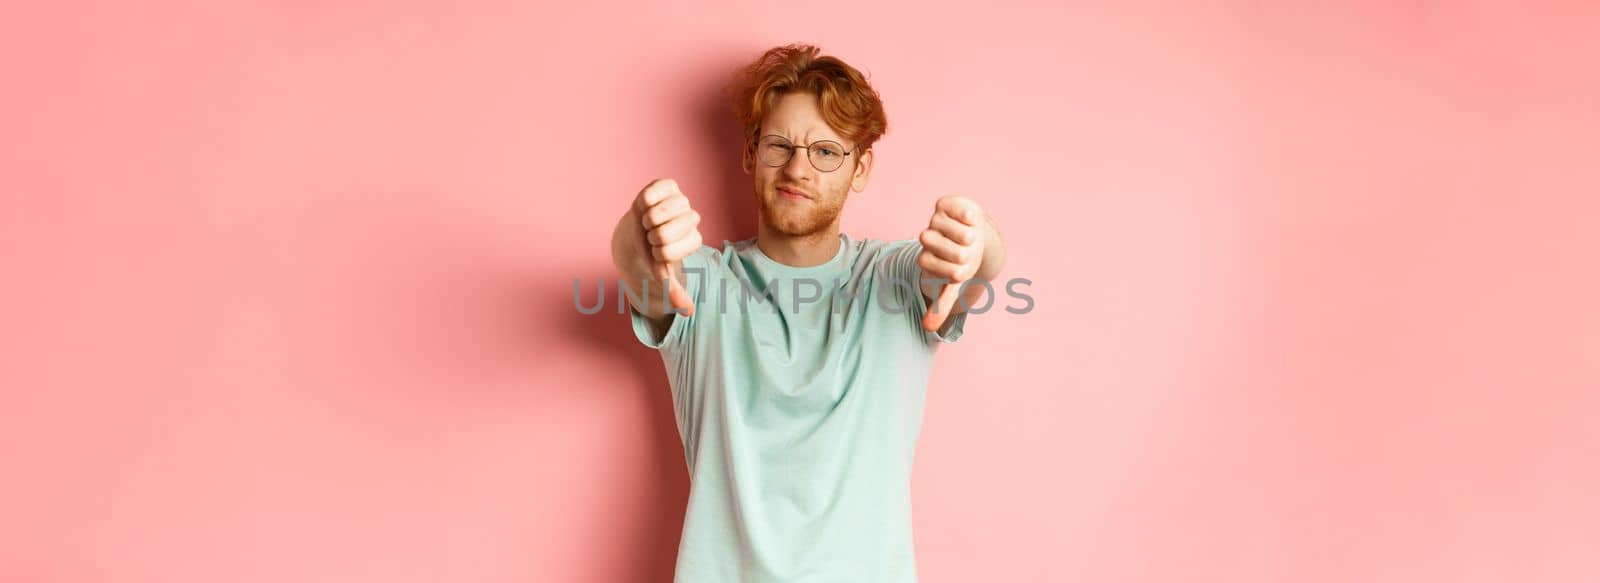 Disappointed young man in glasses, with messy red haircut, showing thumbs down and grimacing unsatisfied, express dislike, standing over pink background.